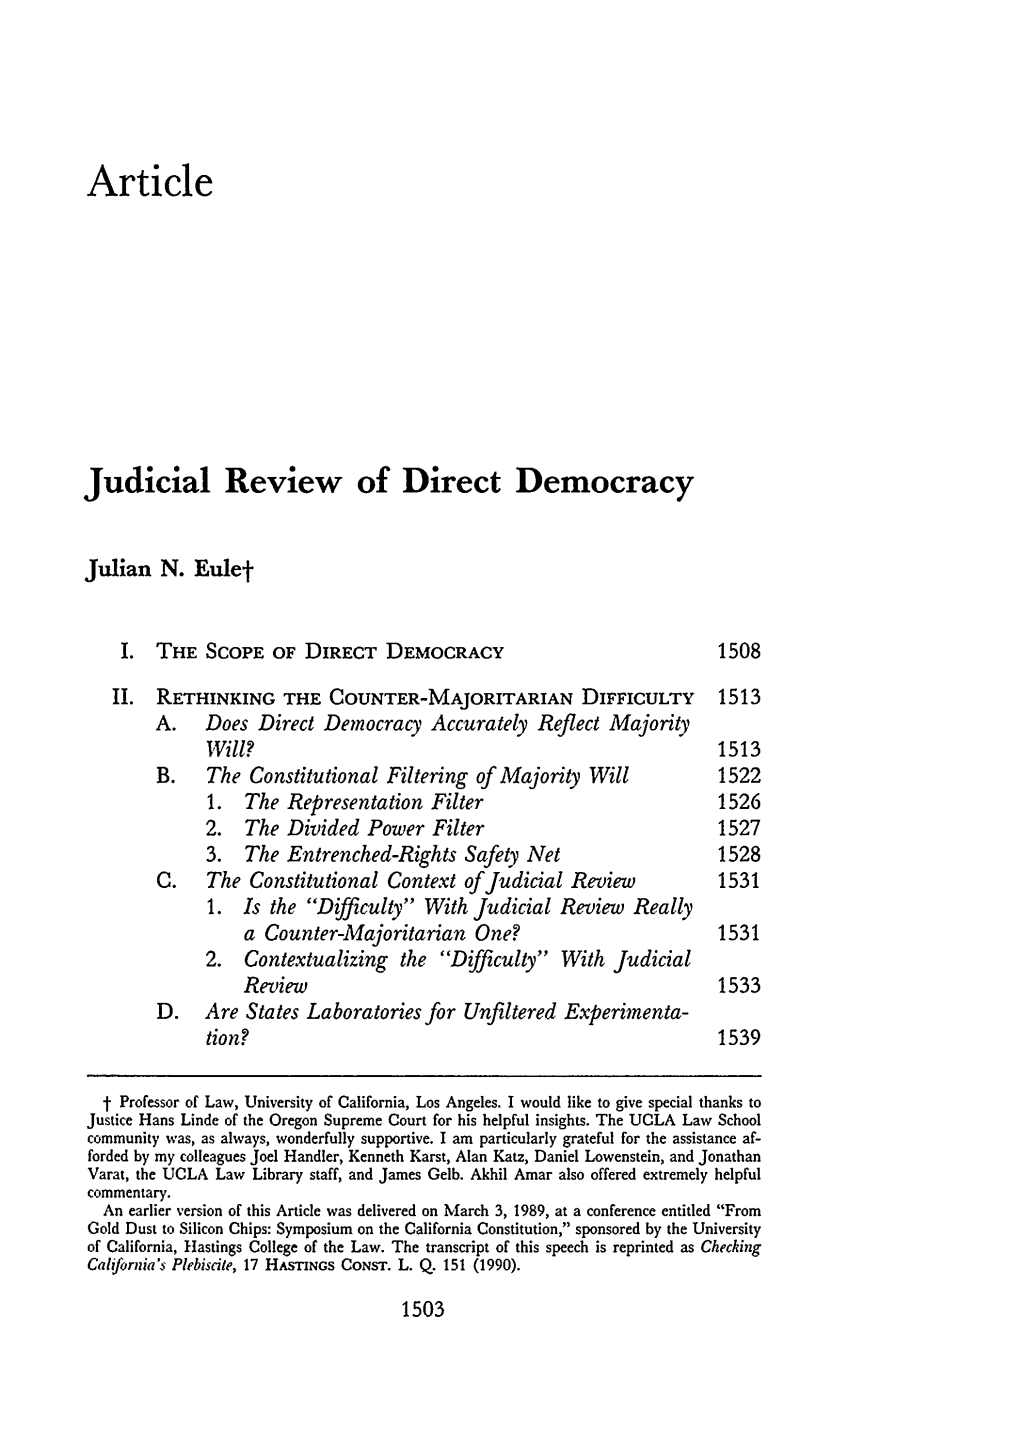 Judicial Review of Direct Democracy